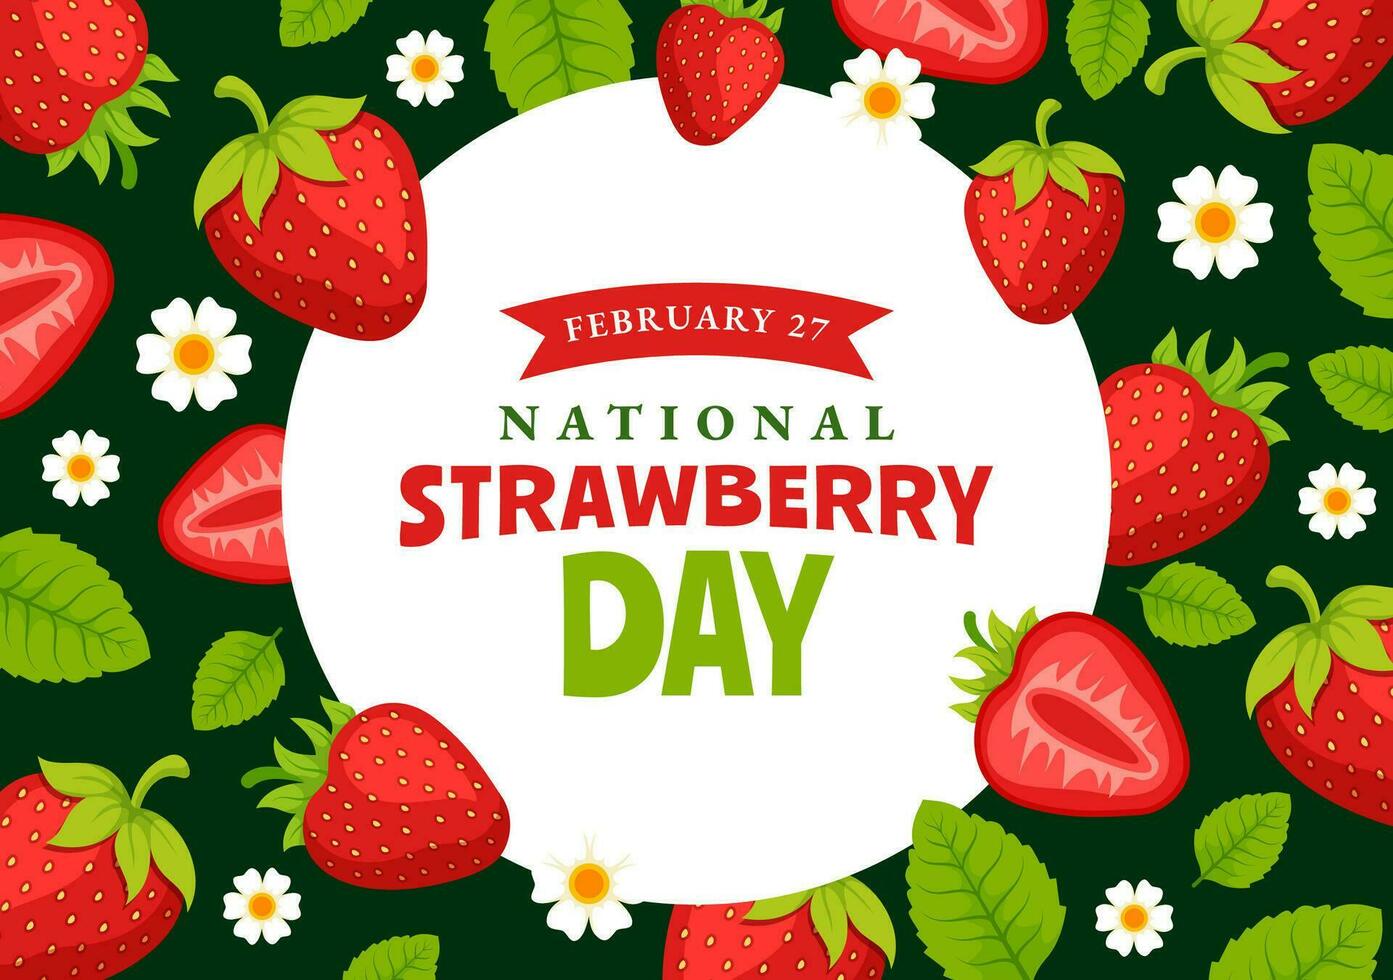 National Strawberry Day Vector Illustration on February 27 to Celebrate the Sweet Little Red Fruit in Flat Cartoon Background Design